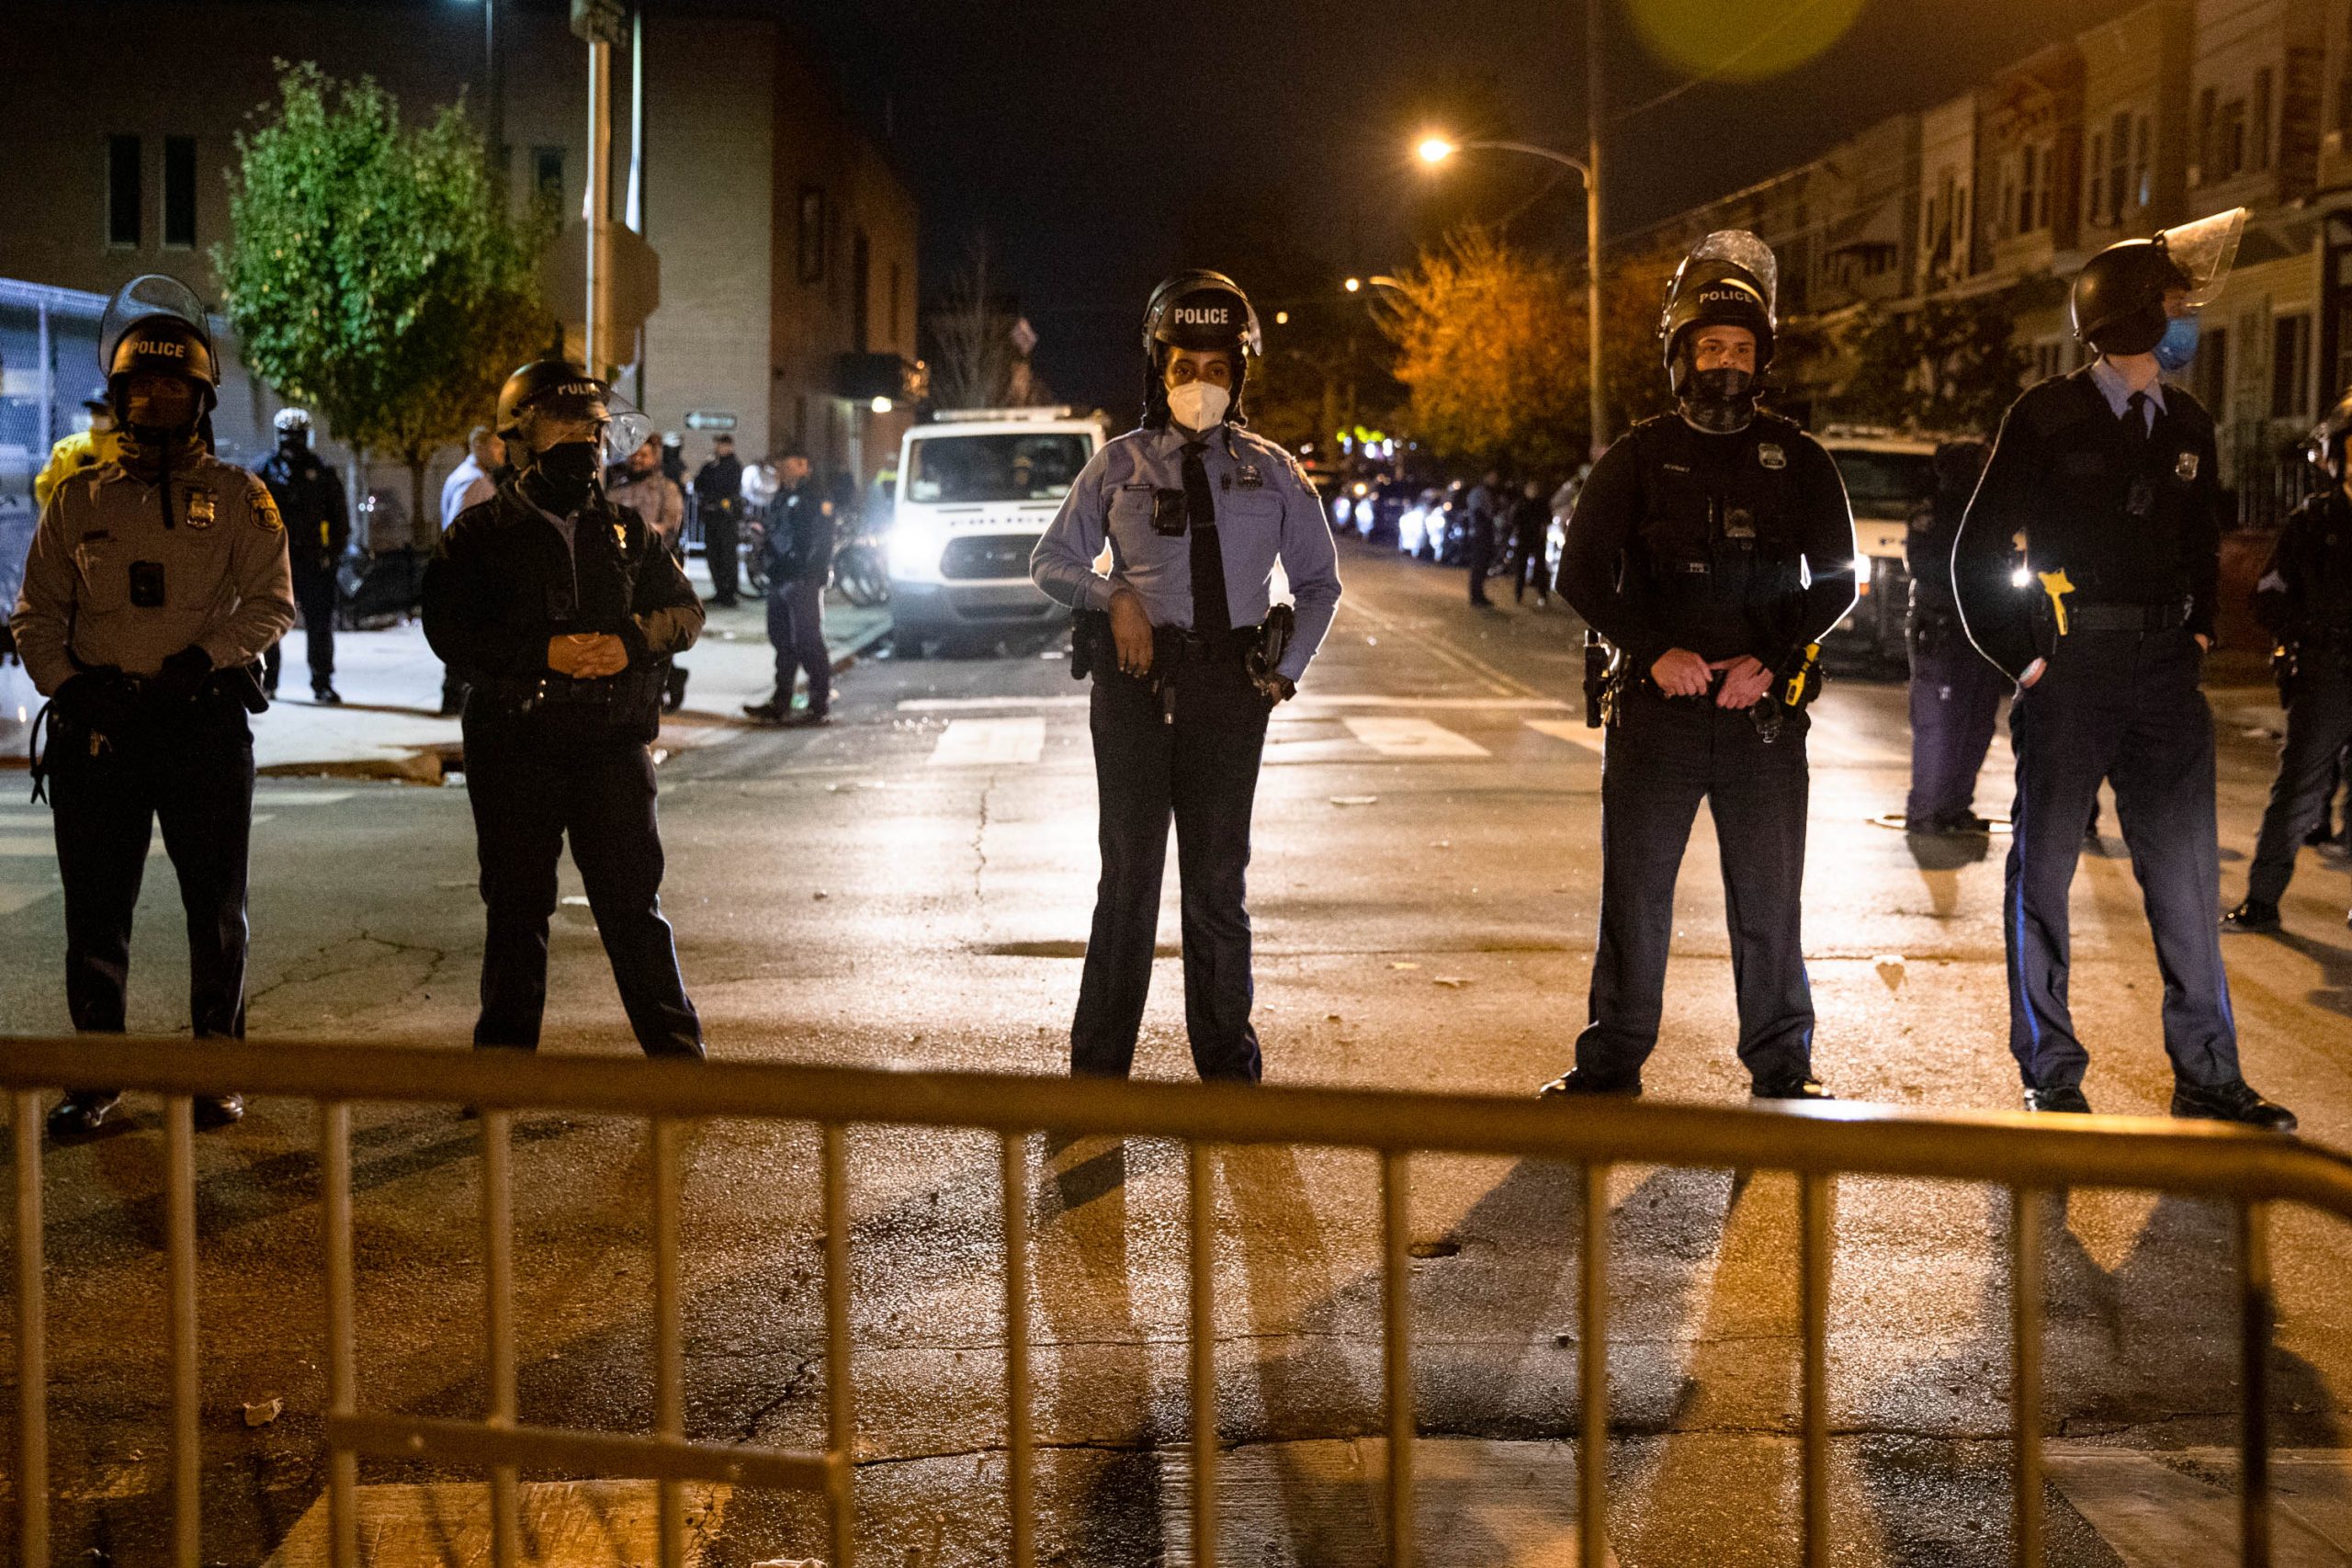 Philadelphia lifts curfew implemented over civil unrest after police shooting of Black man